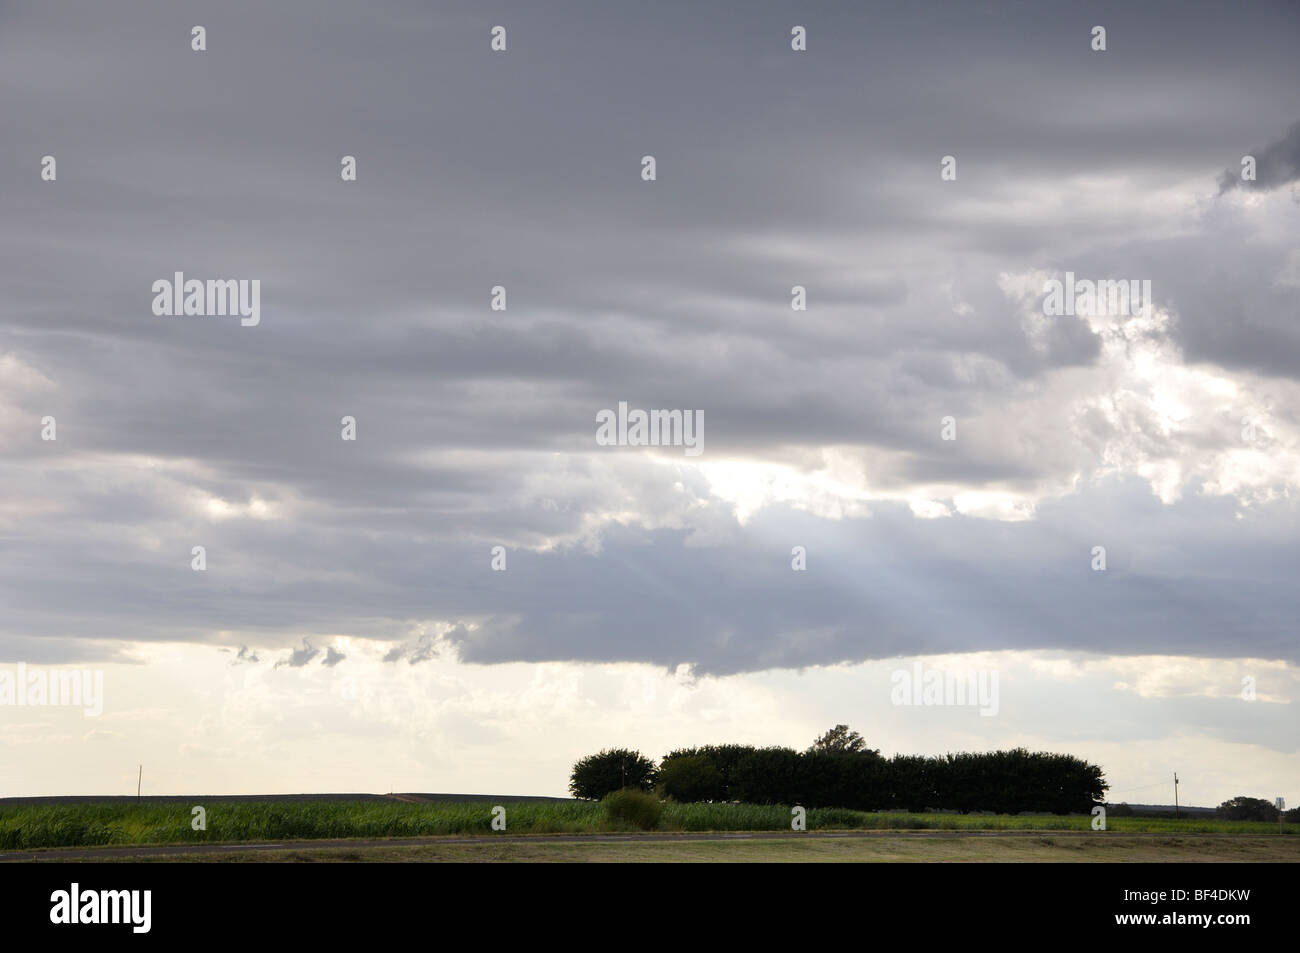 Rural Texas in the evening Stock Photo